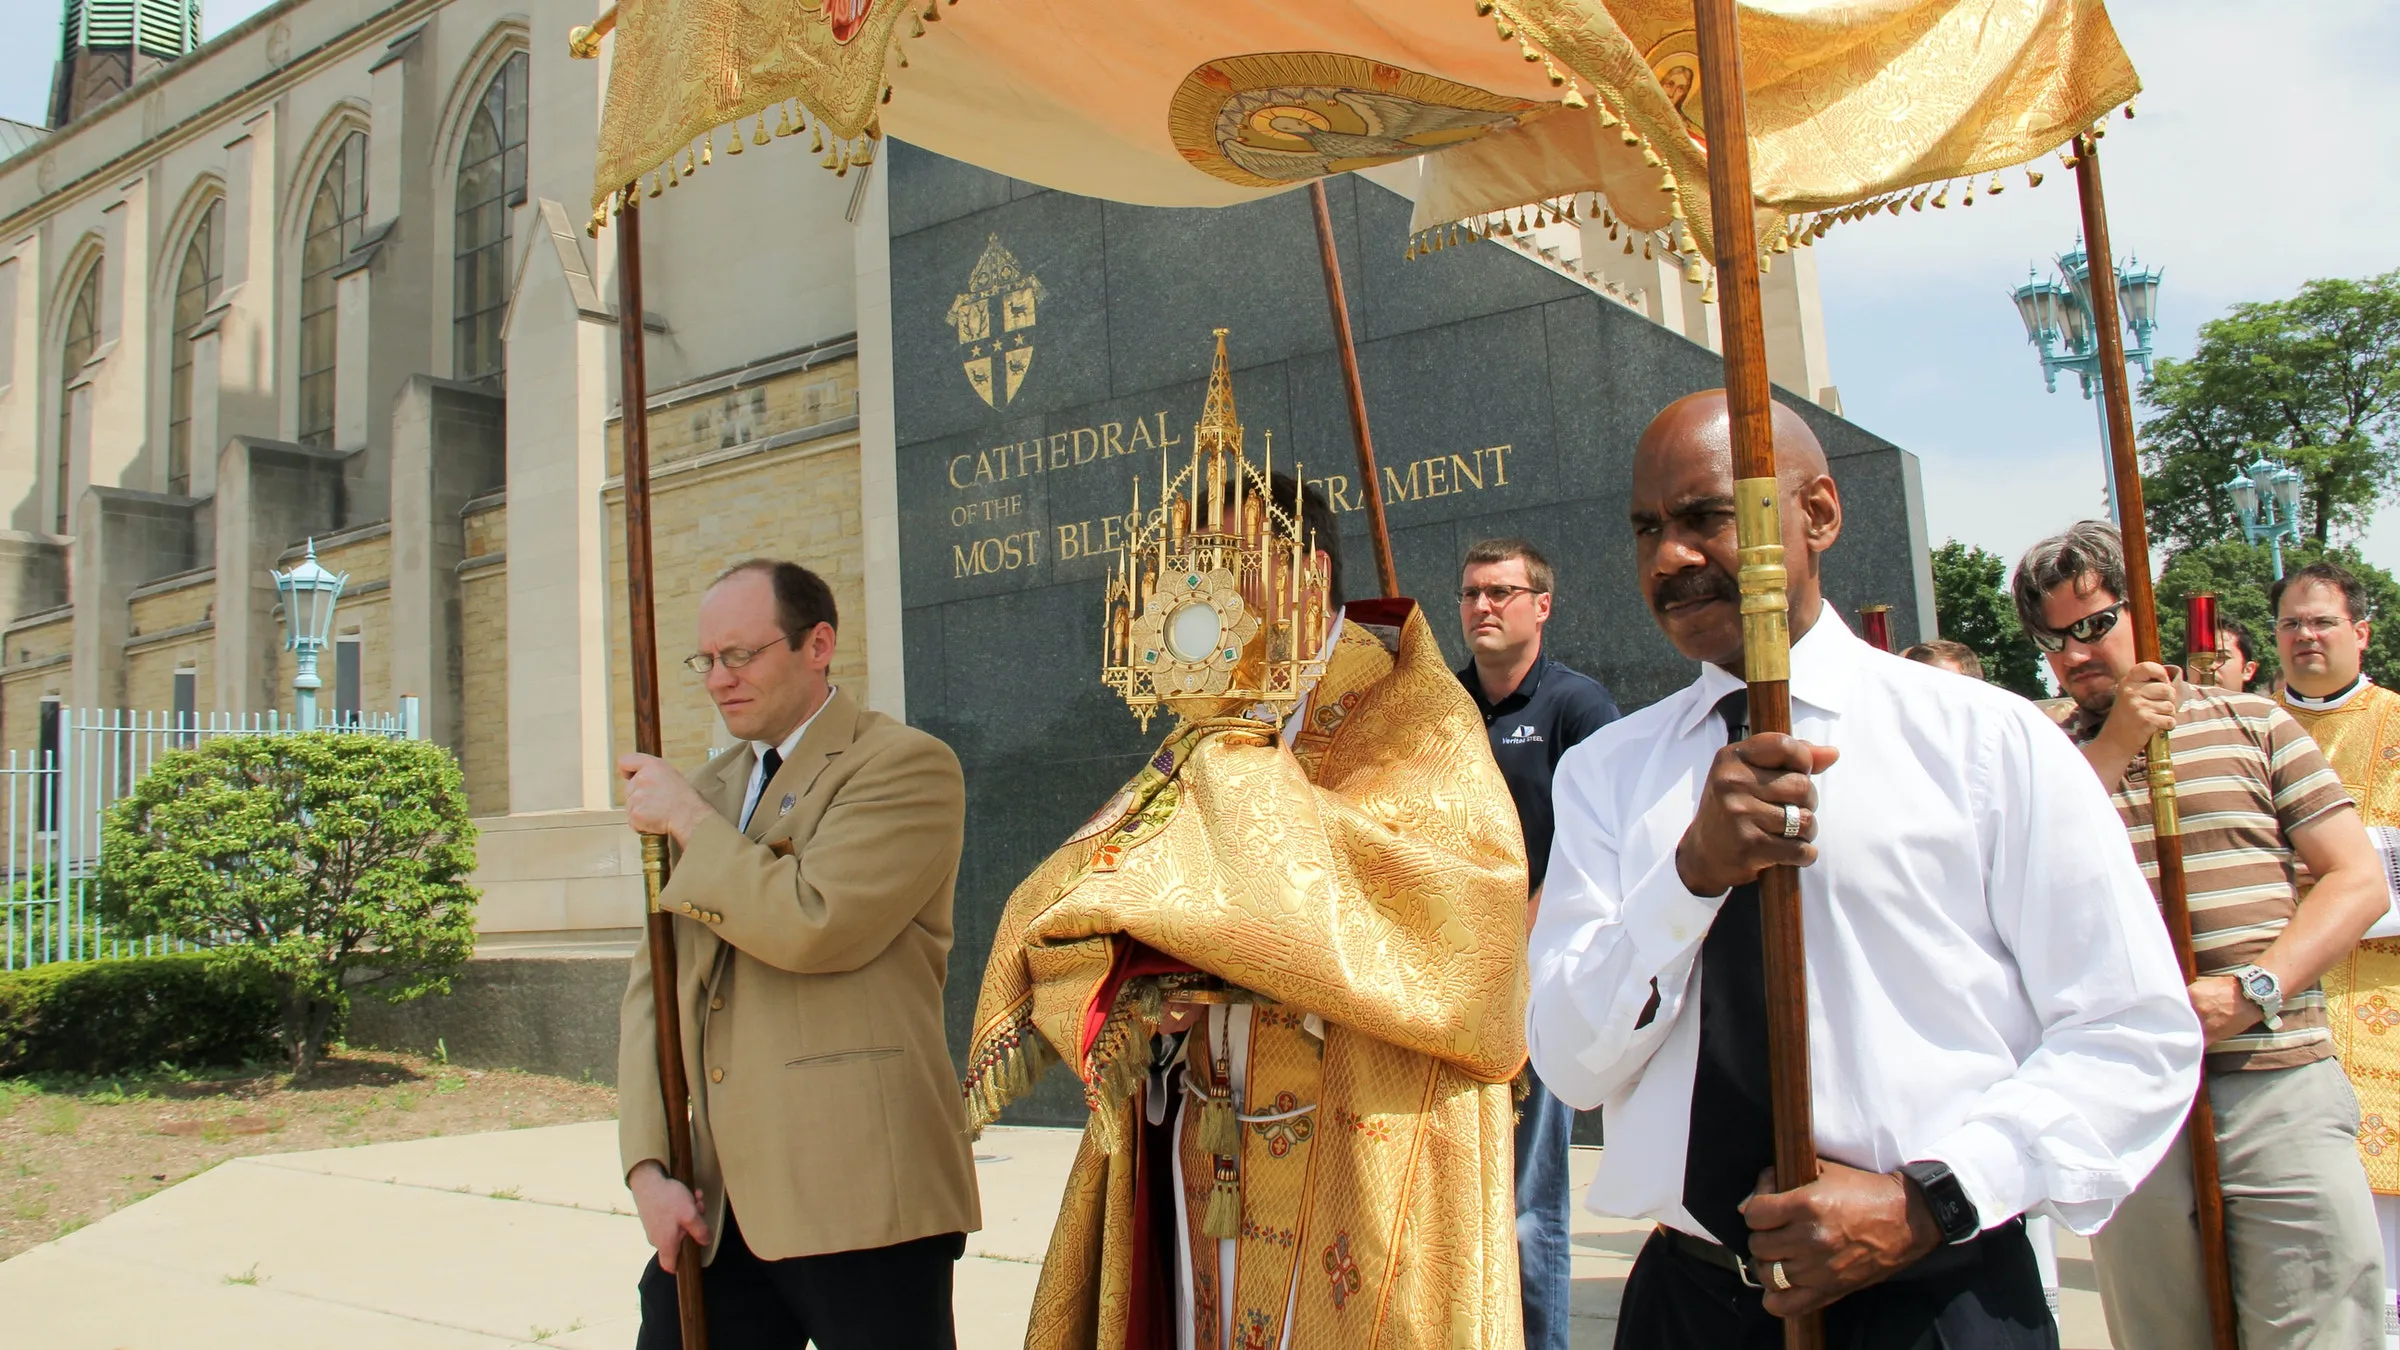 Archbishop Allen H. Vigneron carries the Blessed Sacrament in procession during the feast of Corpus Christi in June 2016. This year, the Archdiocese of Detroit is inviting the faithful to take part in a two-mile Eucharistic procession June 19 from the Cathedral of the Most Blessed Sacrament to Sacred Heart Major Seminary in Detroit as part of the launch of a three-year National Eucharistic Revival.?w=200&h=150